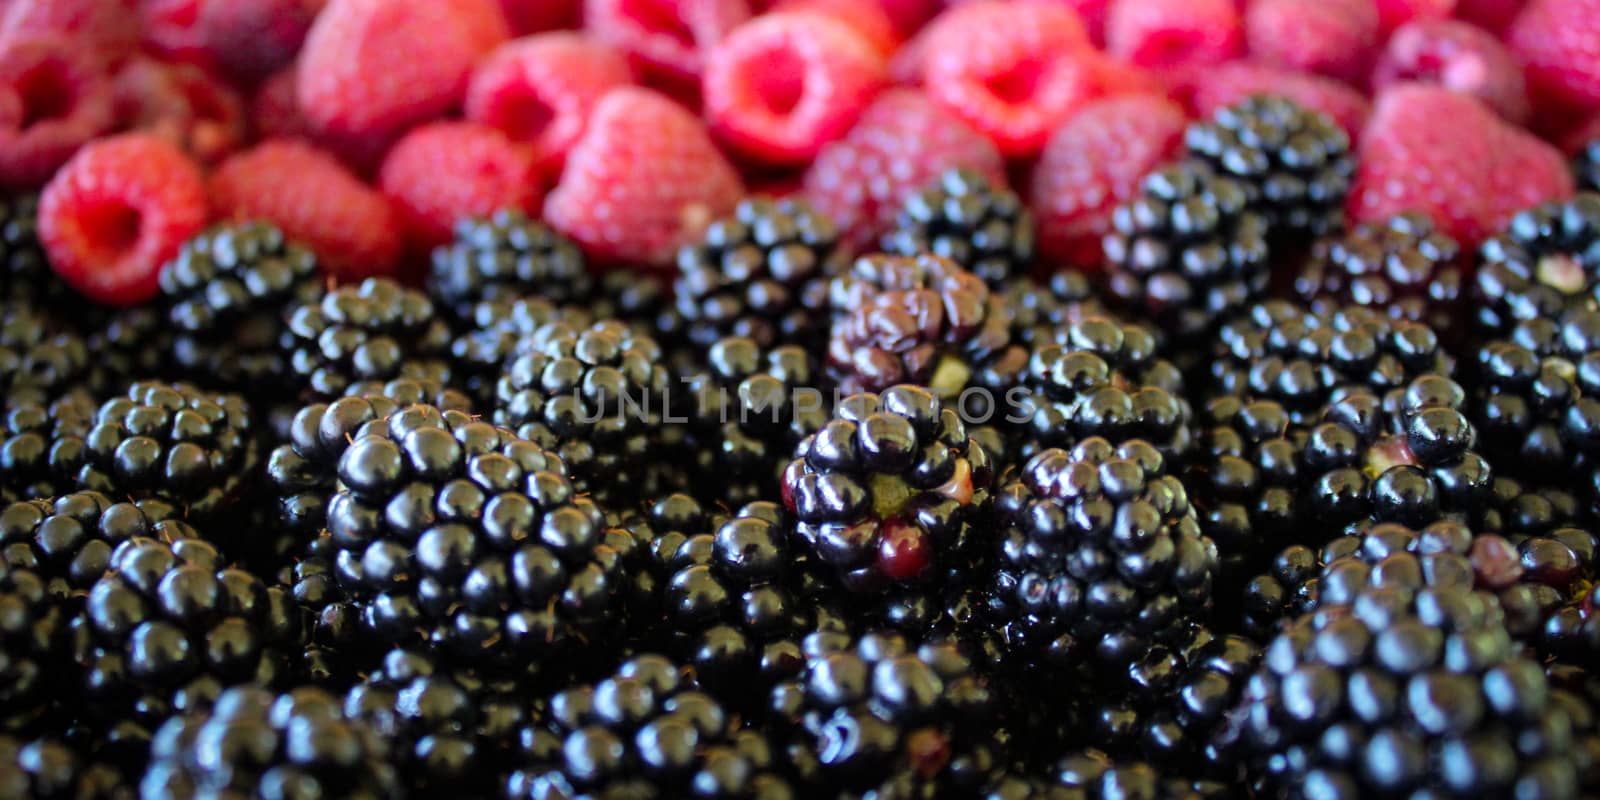 Banner. Close up of blackberries and raspberries in the background. Zavidovici, Bosnia and Herzegovina.